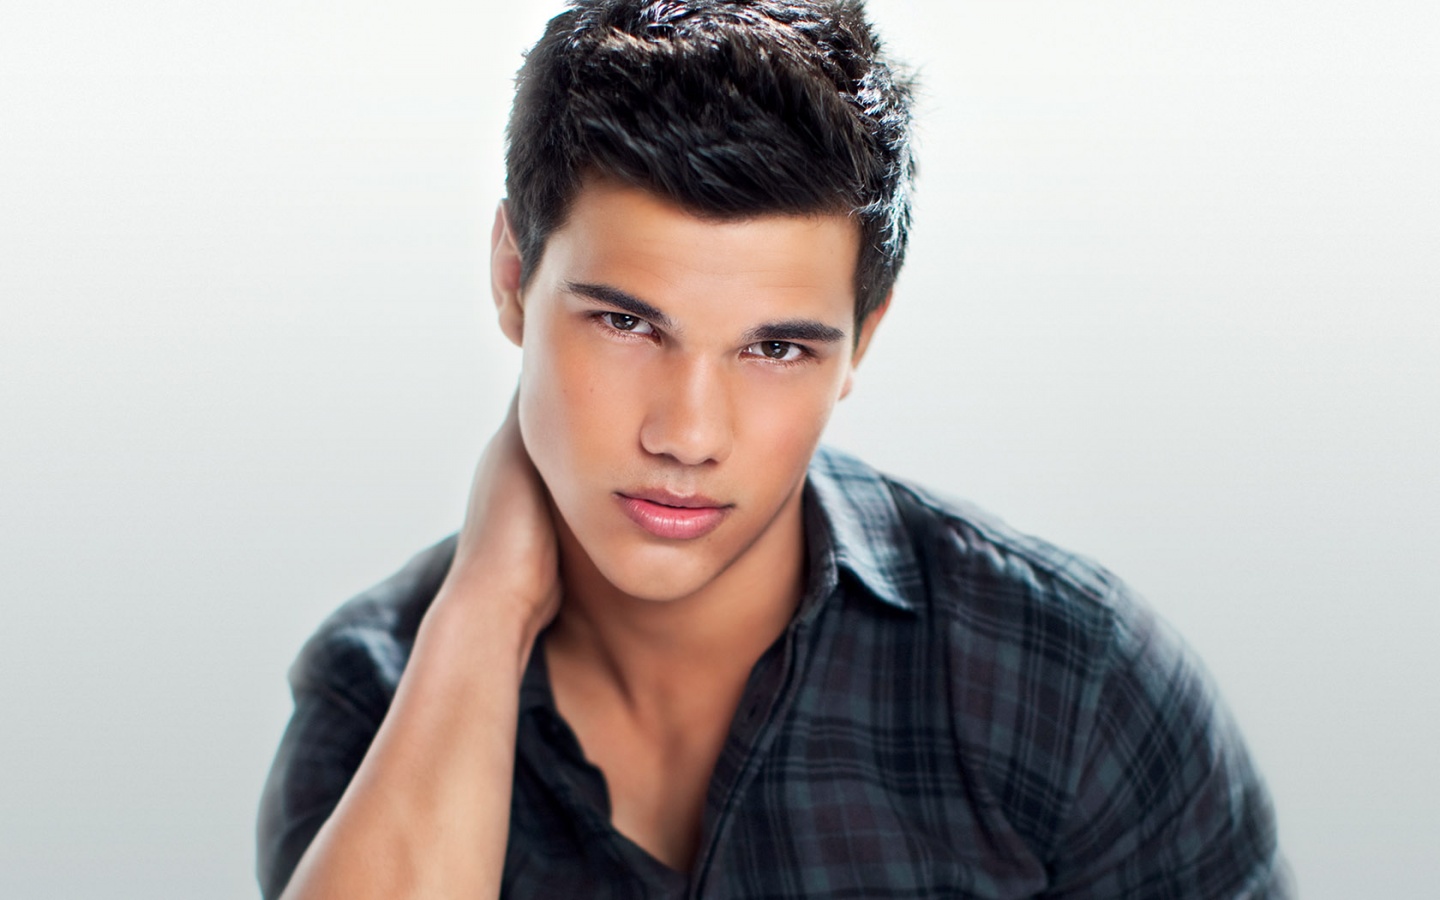 Jacob Black HD Wallpaper In High Resolution For Get